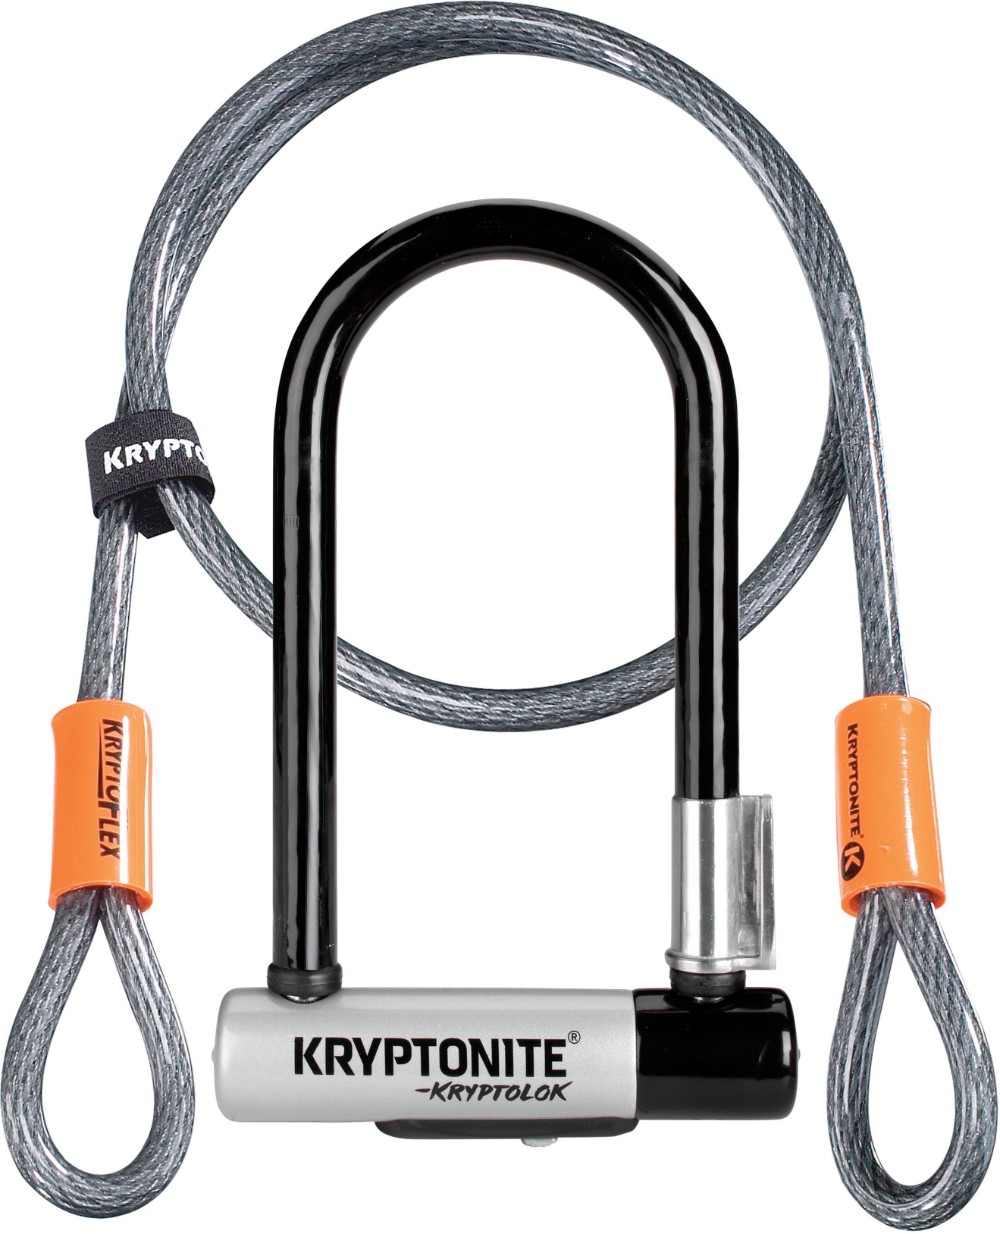 Kryptolok Mini U-lock with 4 Foot Flex Cable and Flexframe Bracket - Sold Secure Gold image 0